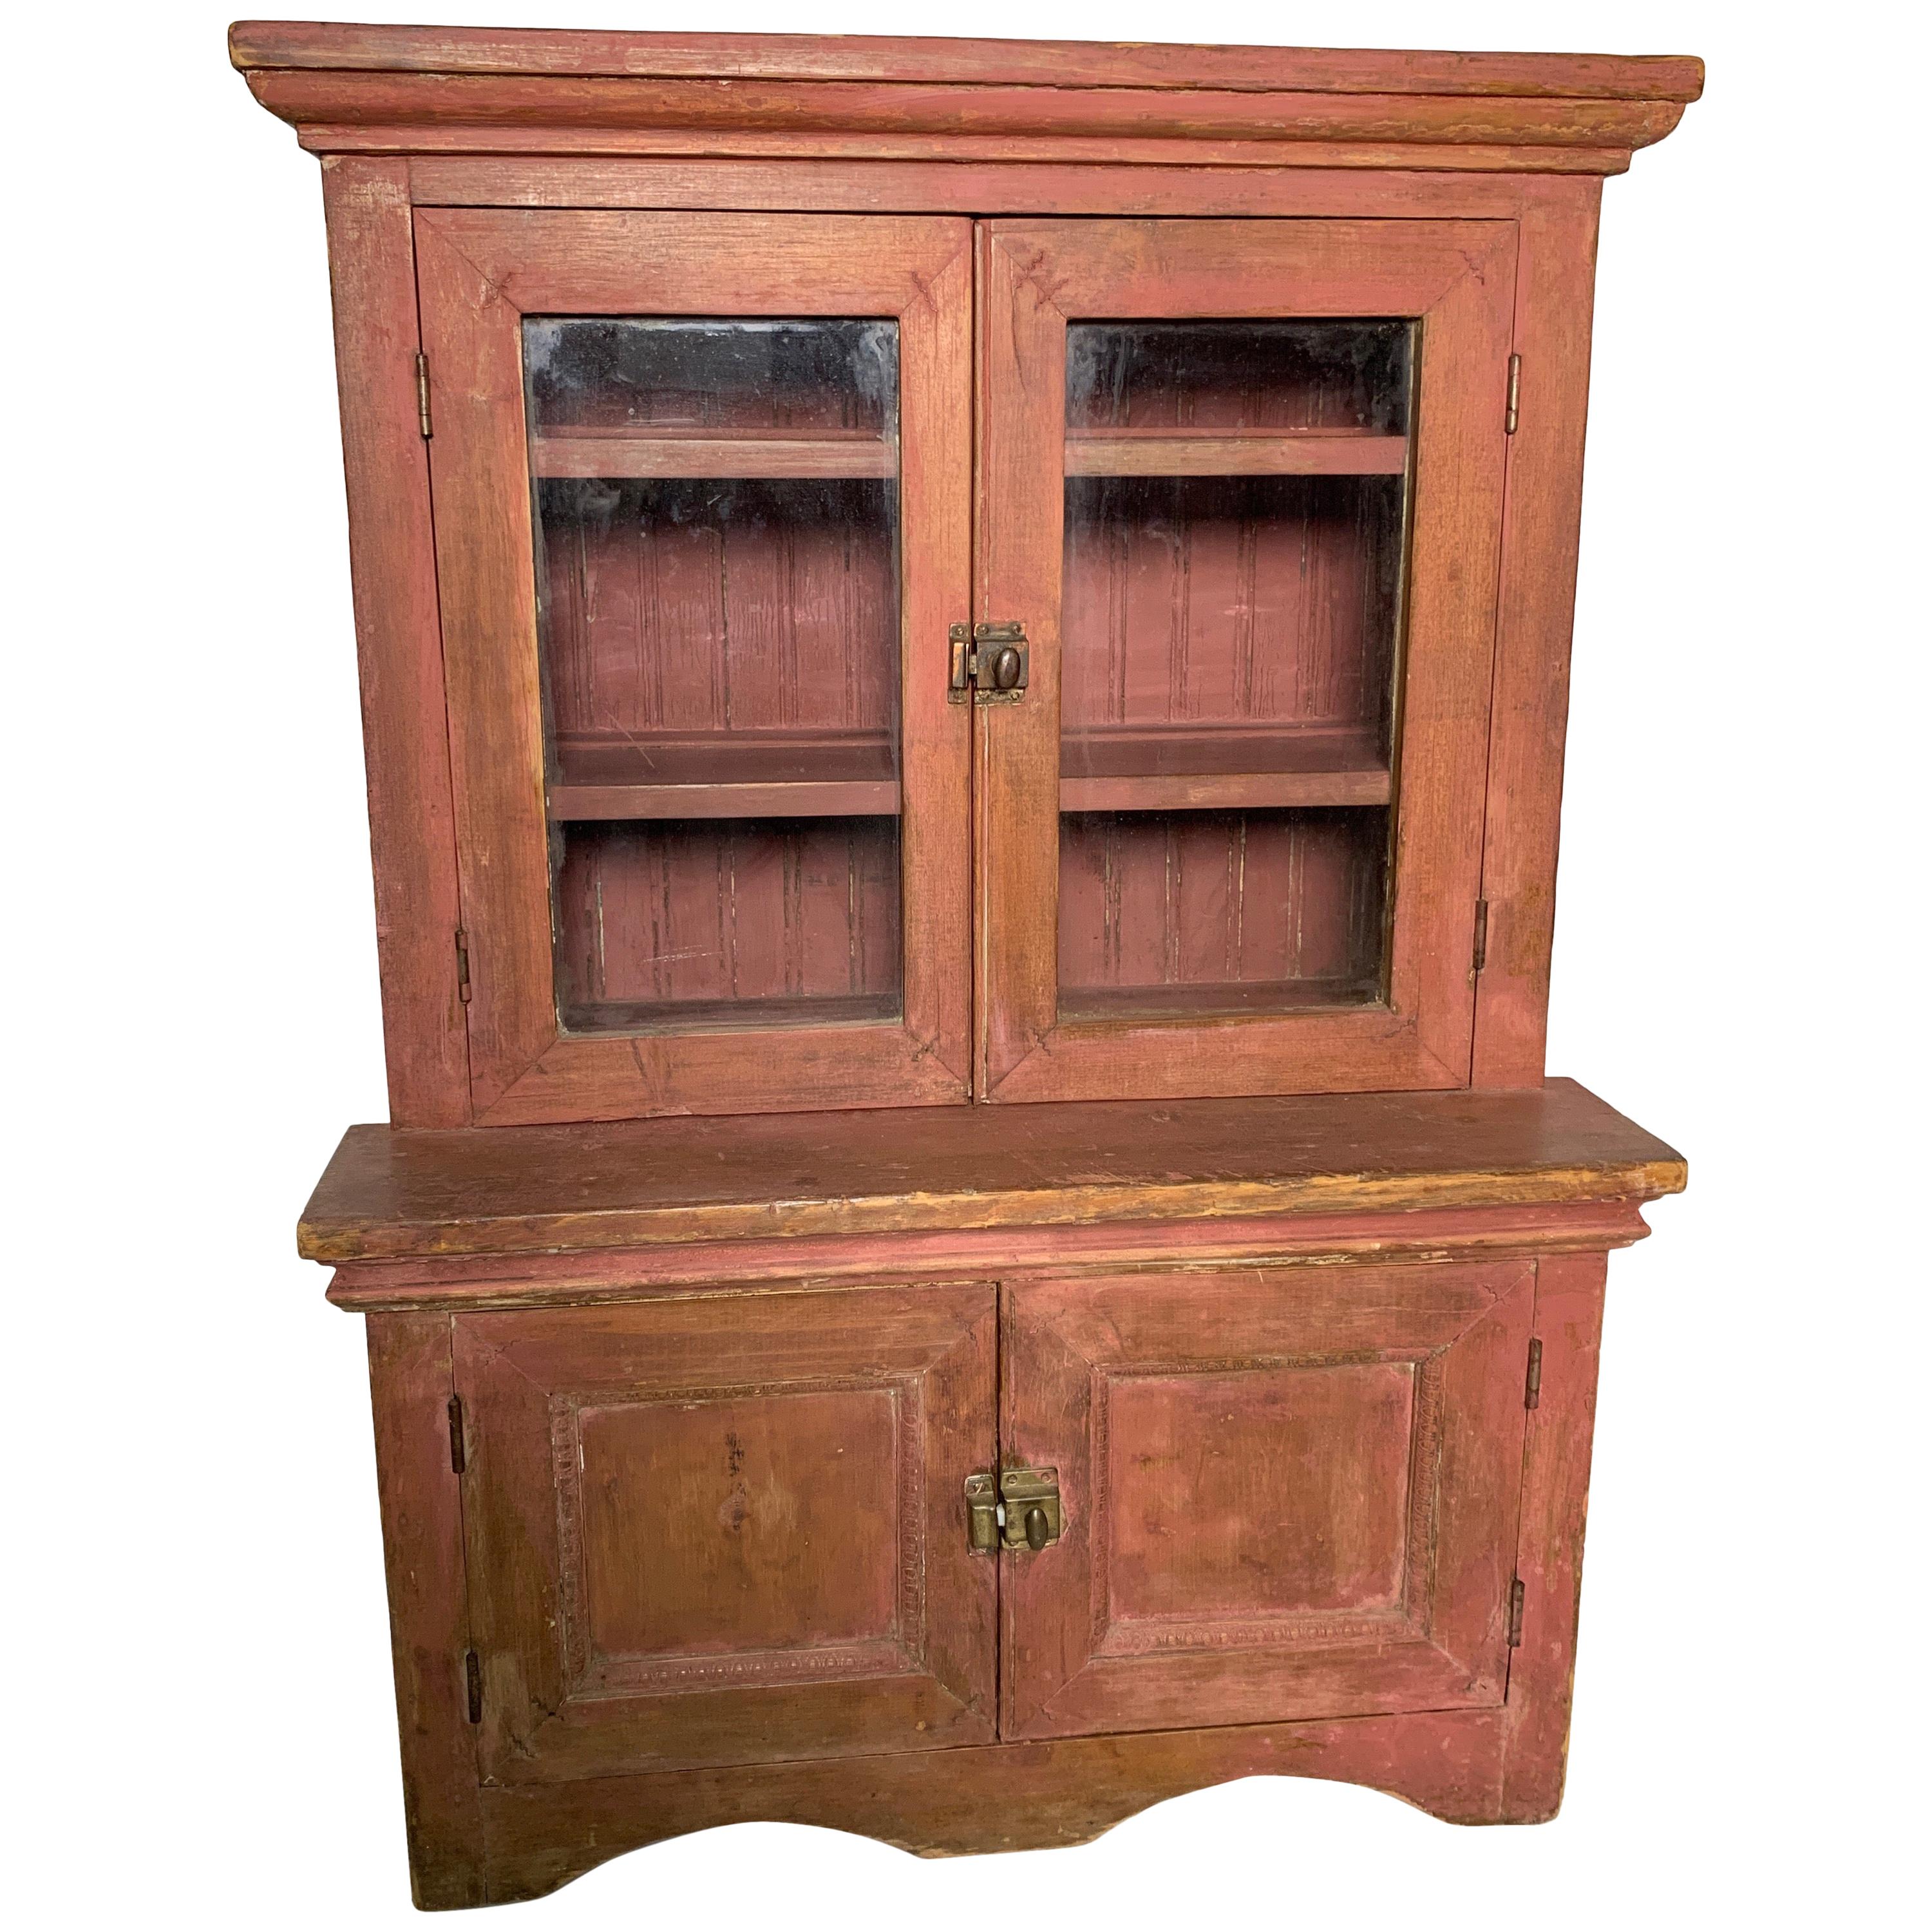 Large Child's Wooden Cupboard, ca. 1900